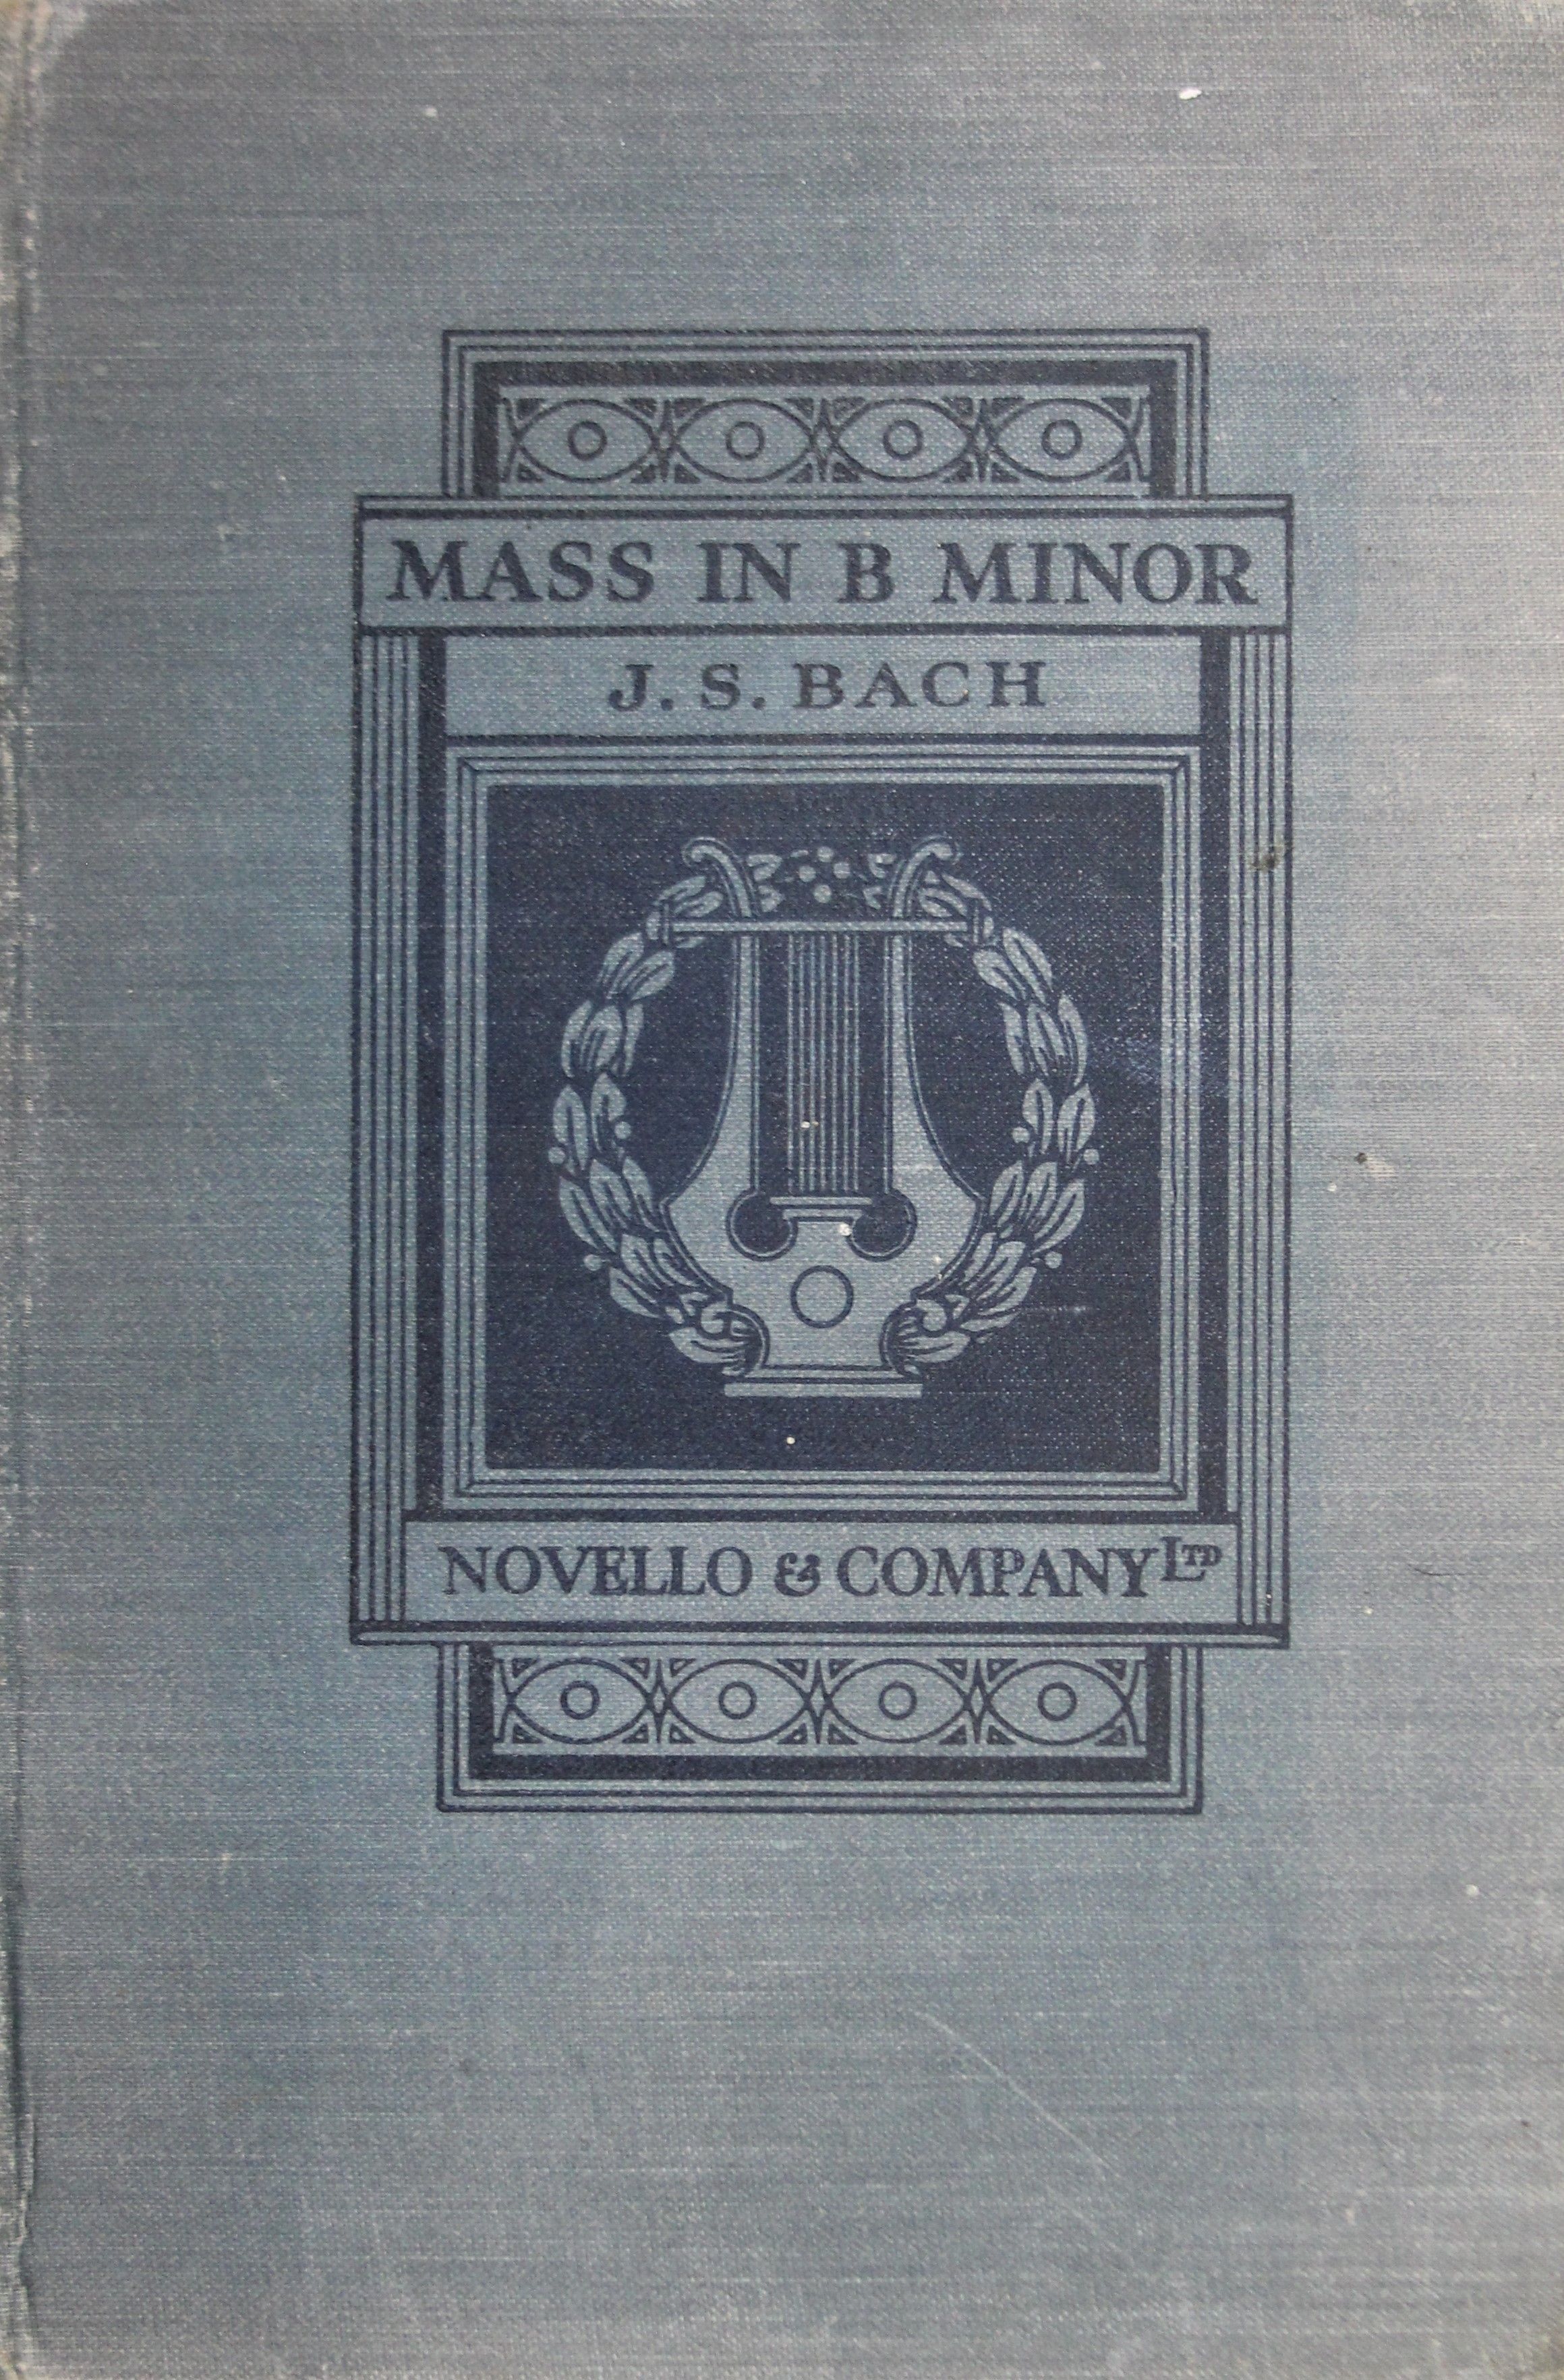 A 1938 hardback score of JS Bach St Mathew Passion edited by Sir Edward Elgar with gilt edged pages, - Image 7 of 9